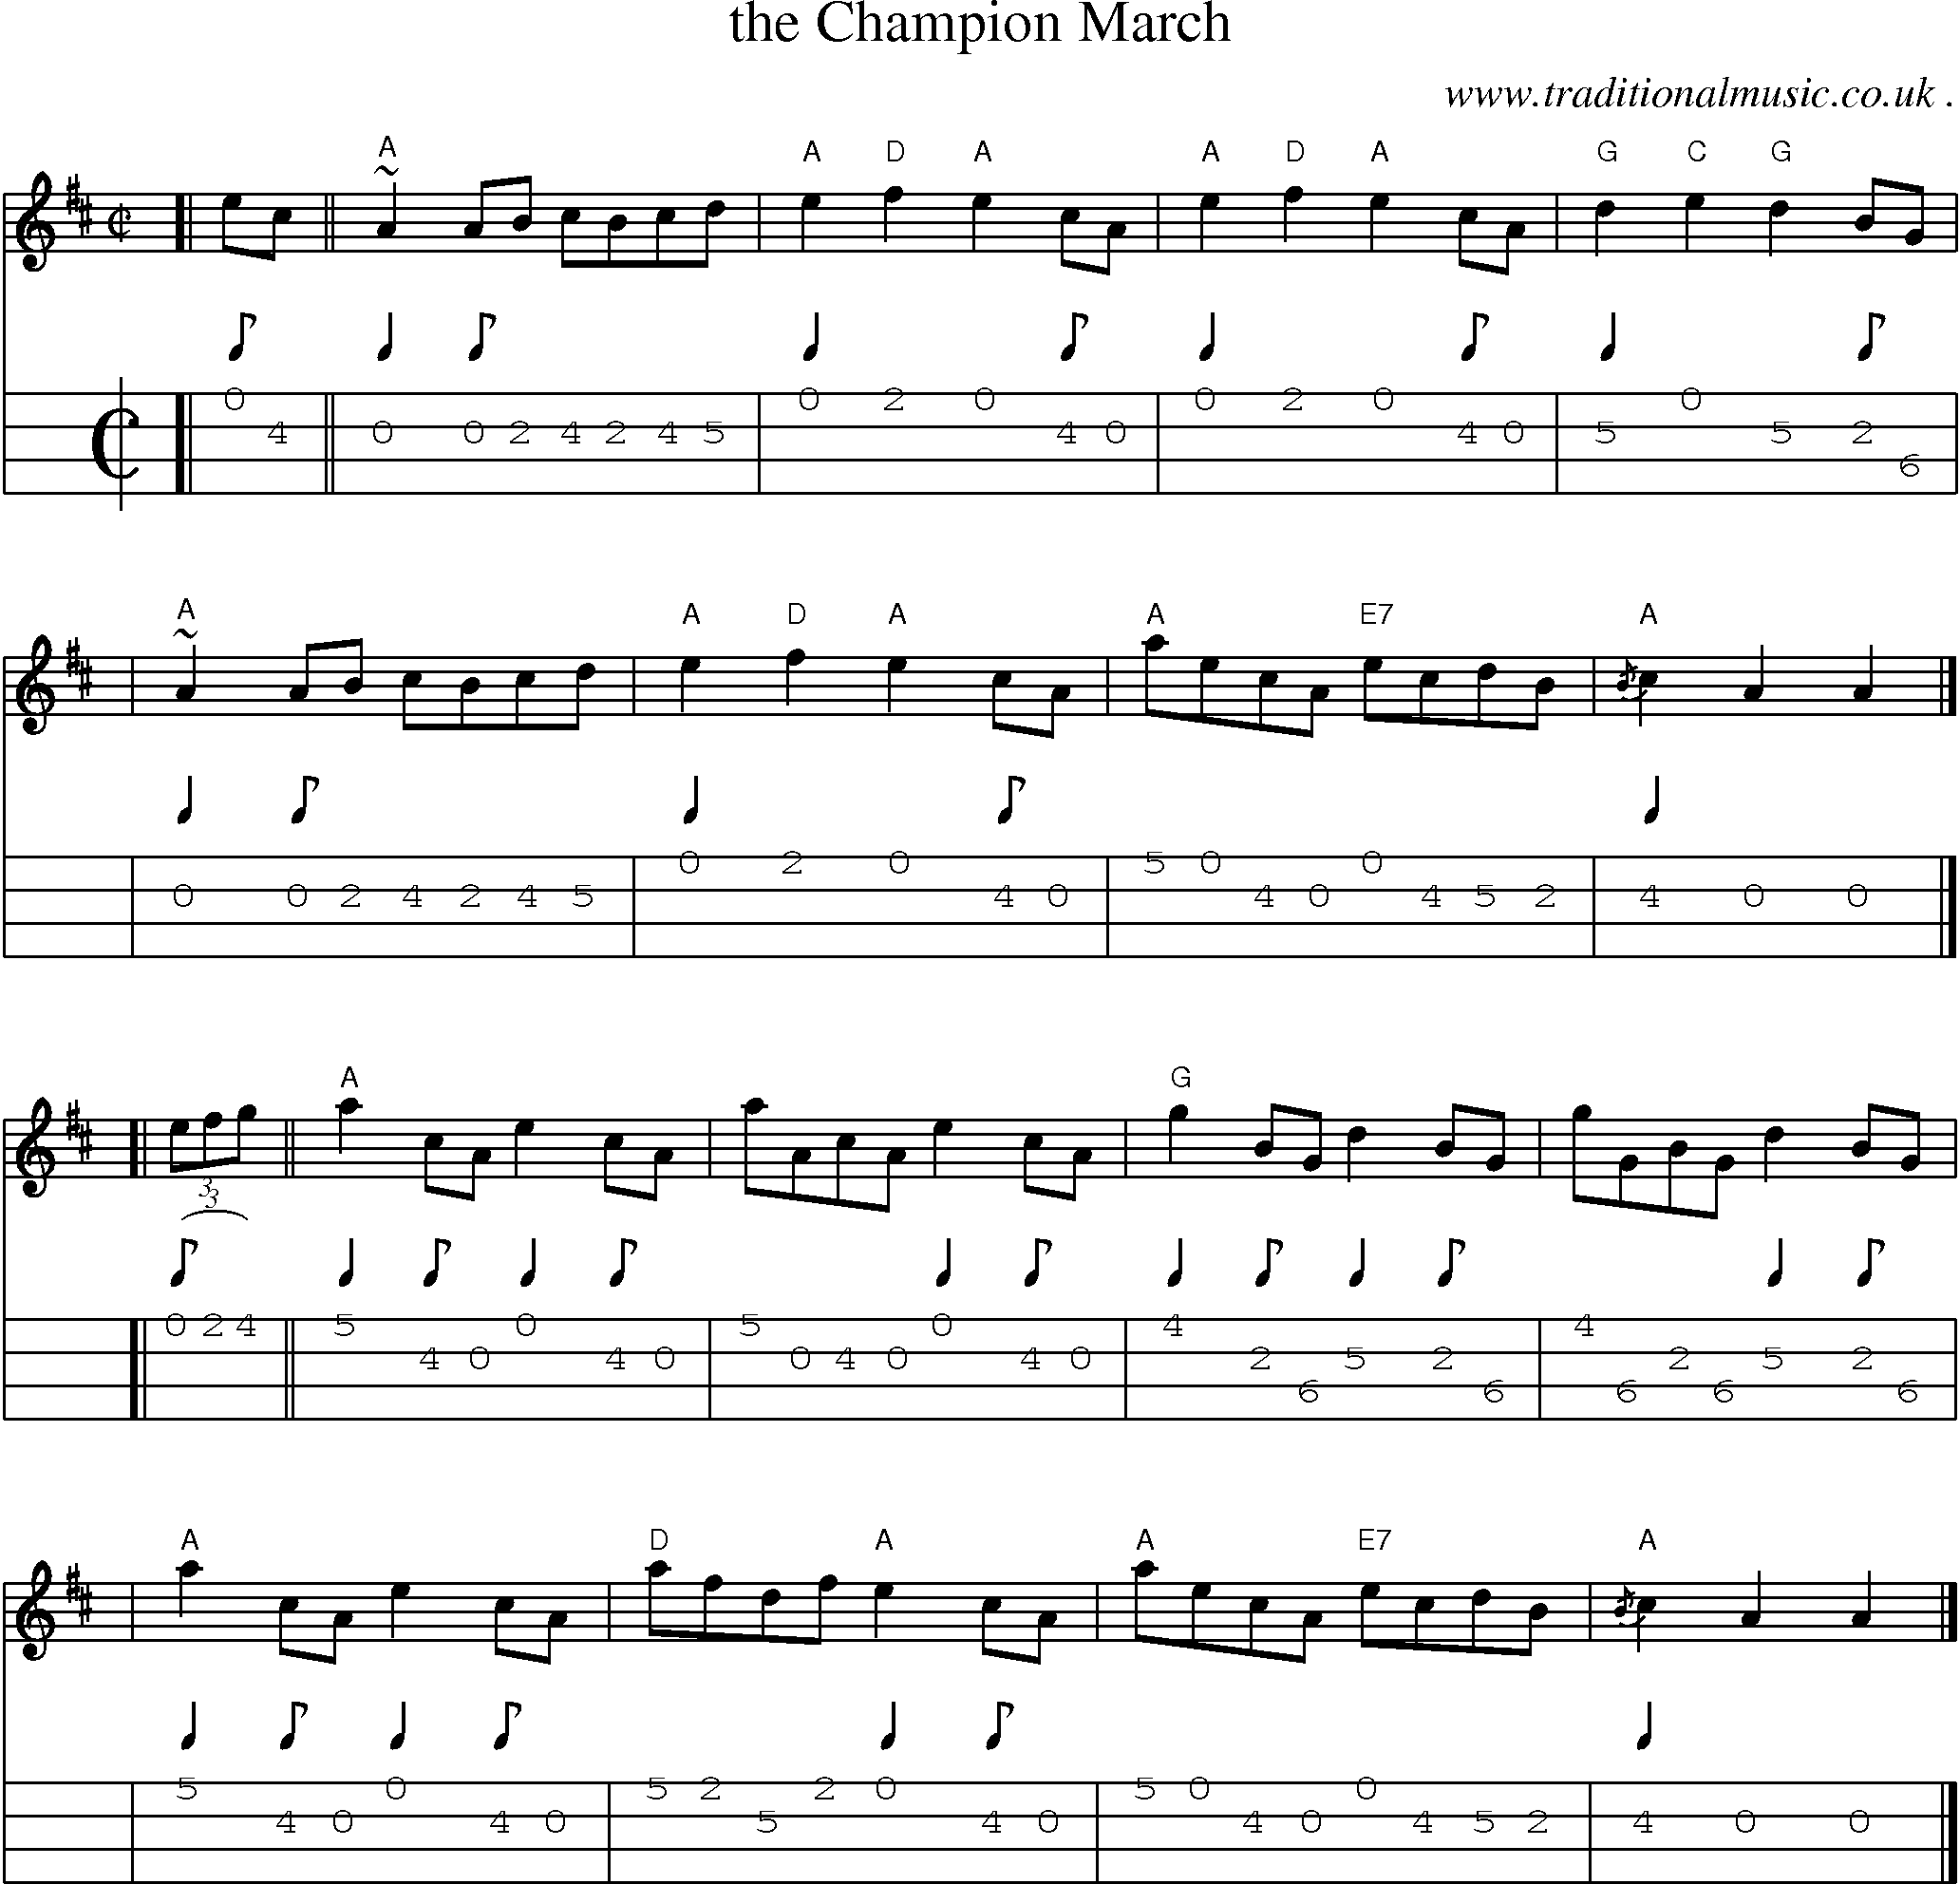 Sheet-music  score, Chords and Mandolin Tabs for The Champion March